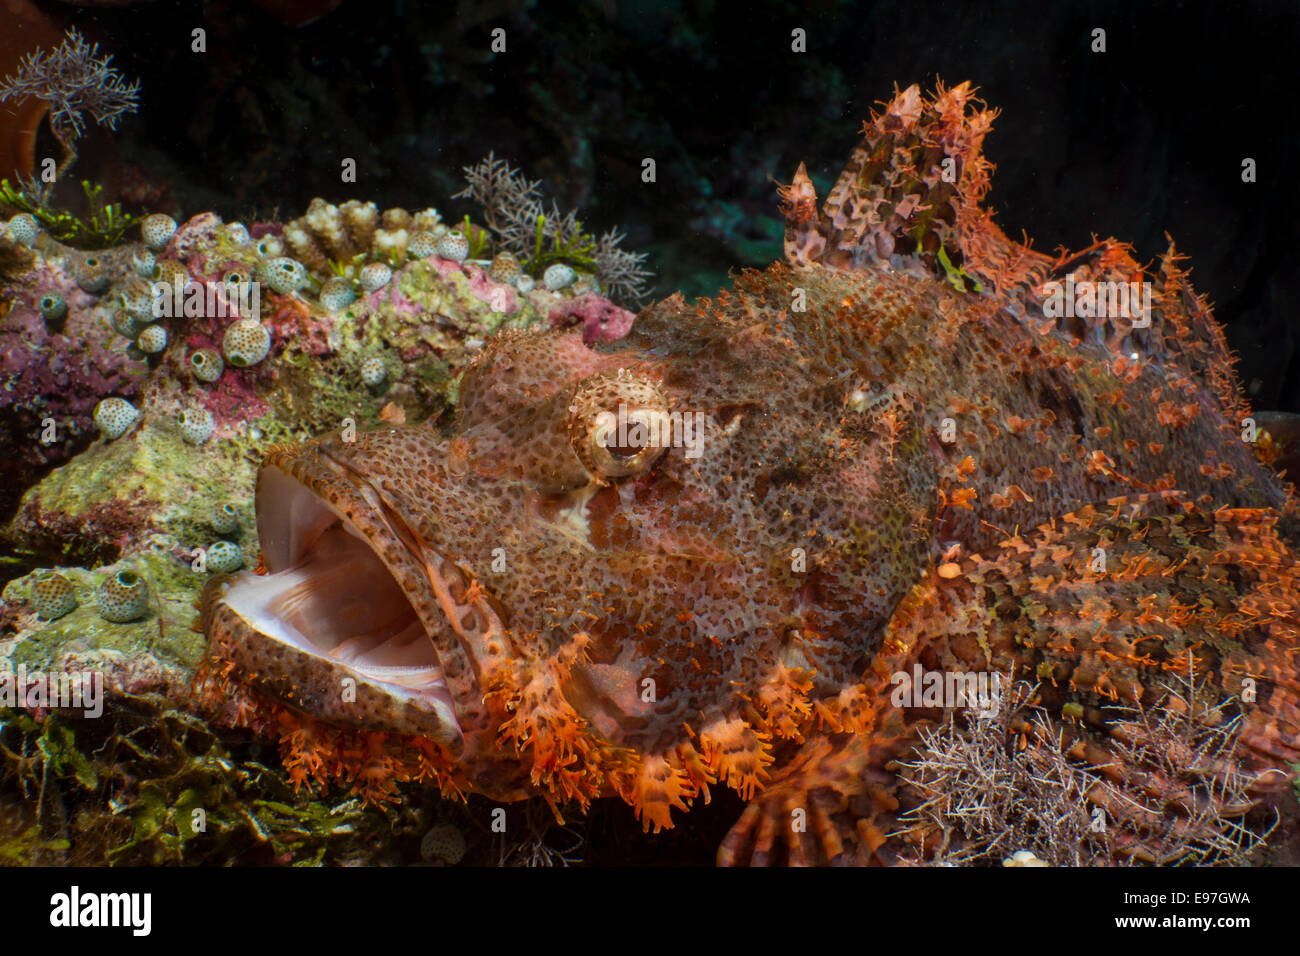 Mouth agape, Tasseled scorpionfish warns a diver to stay away. Stock Photo